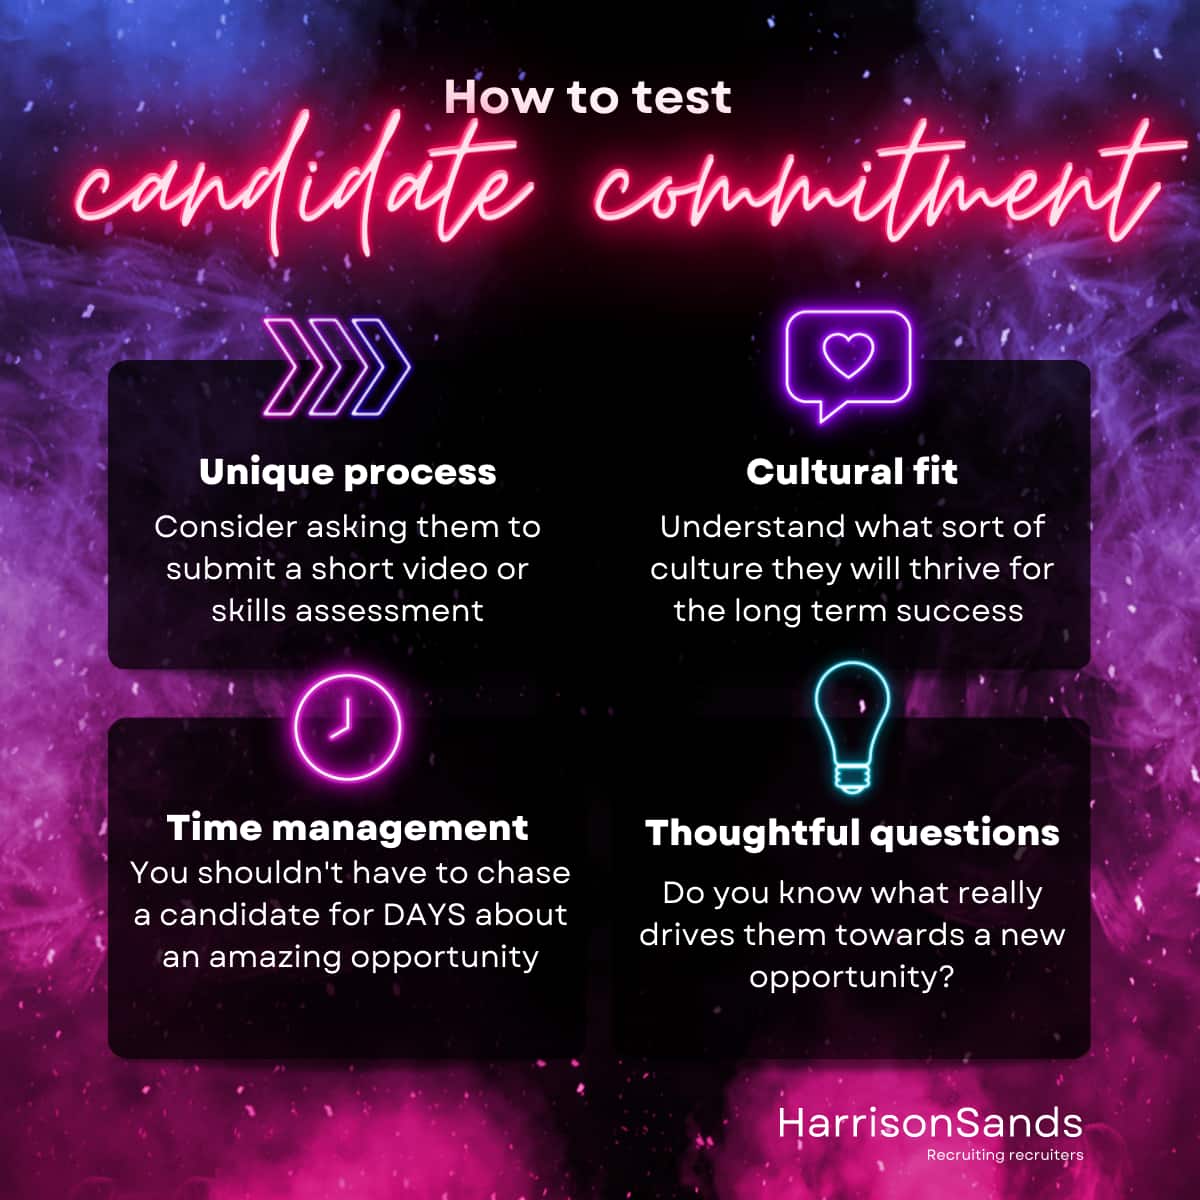 How to test candidate commitment